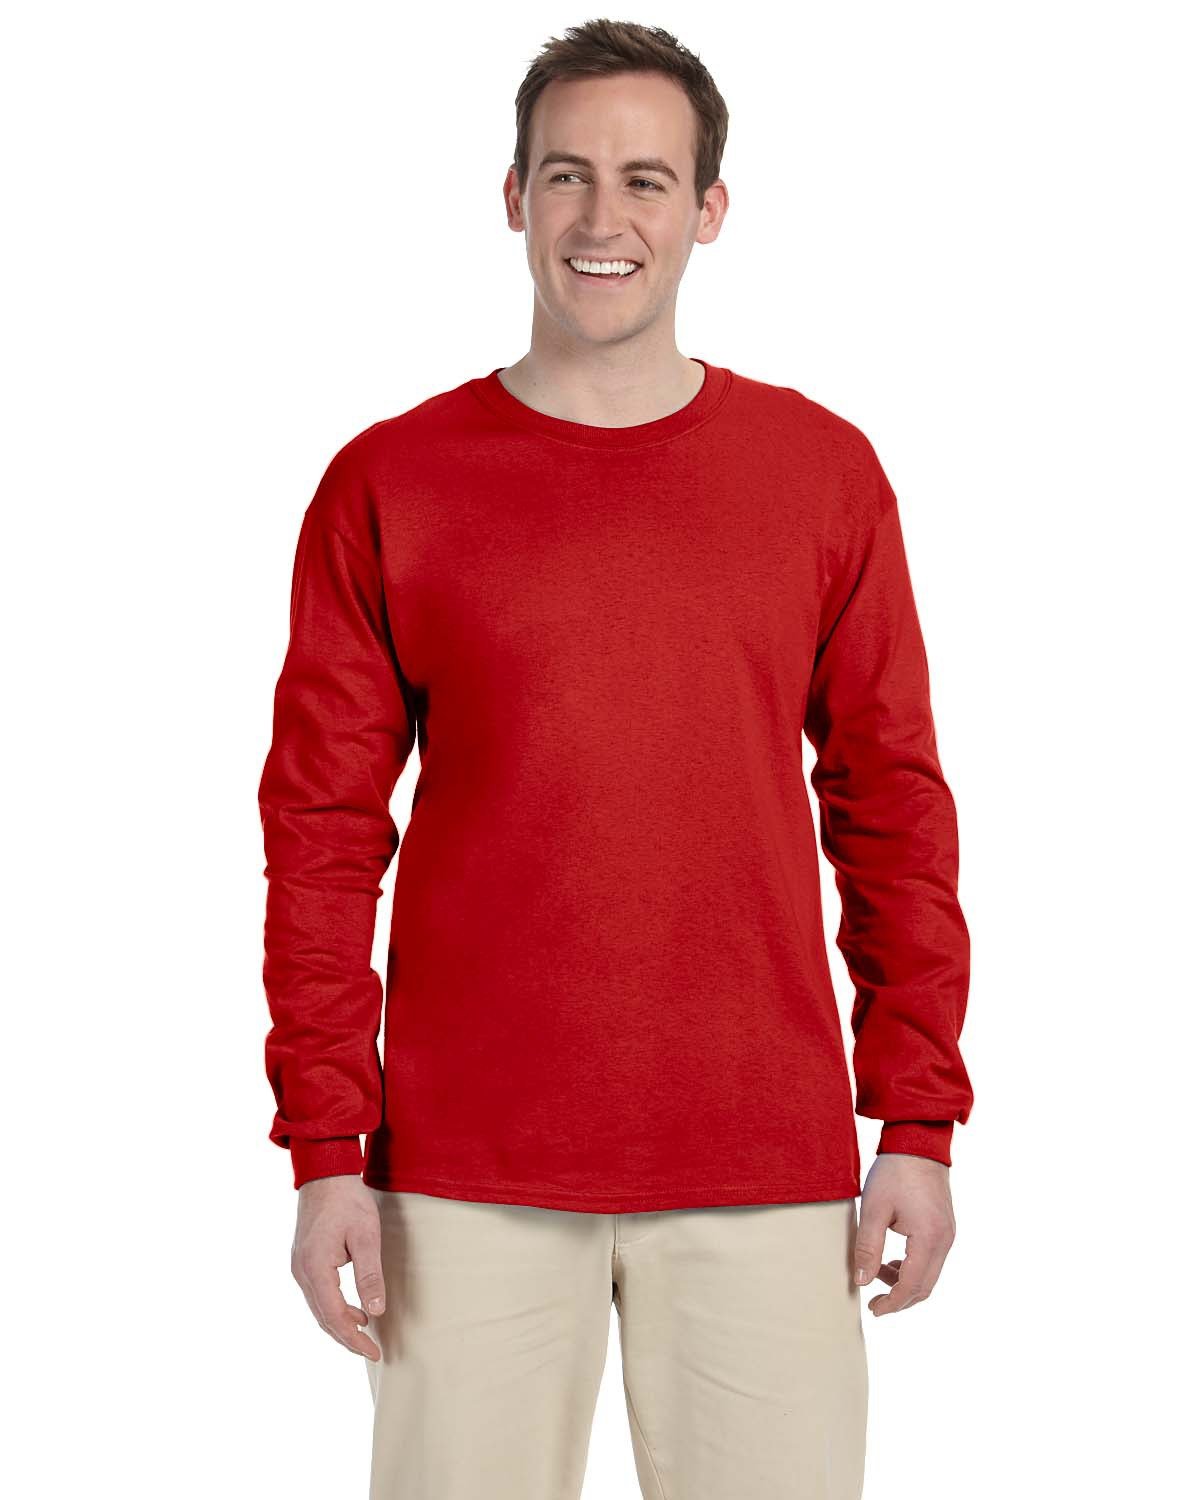 HD Cotton Long Sleeve T-Shirt - Fruit of the Loom 4930R